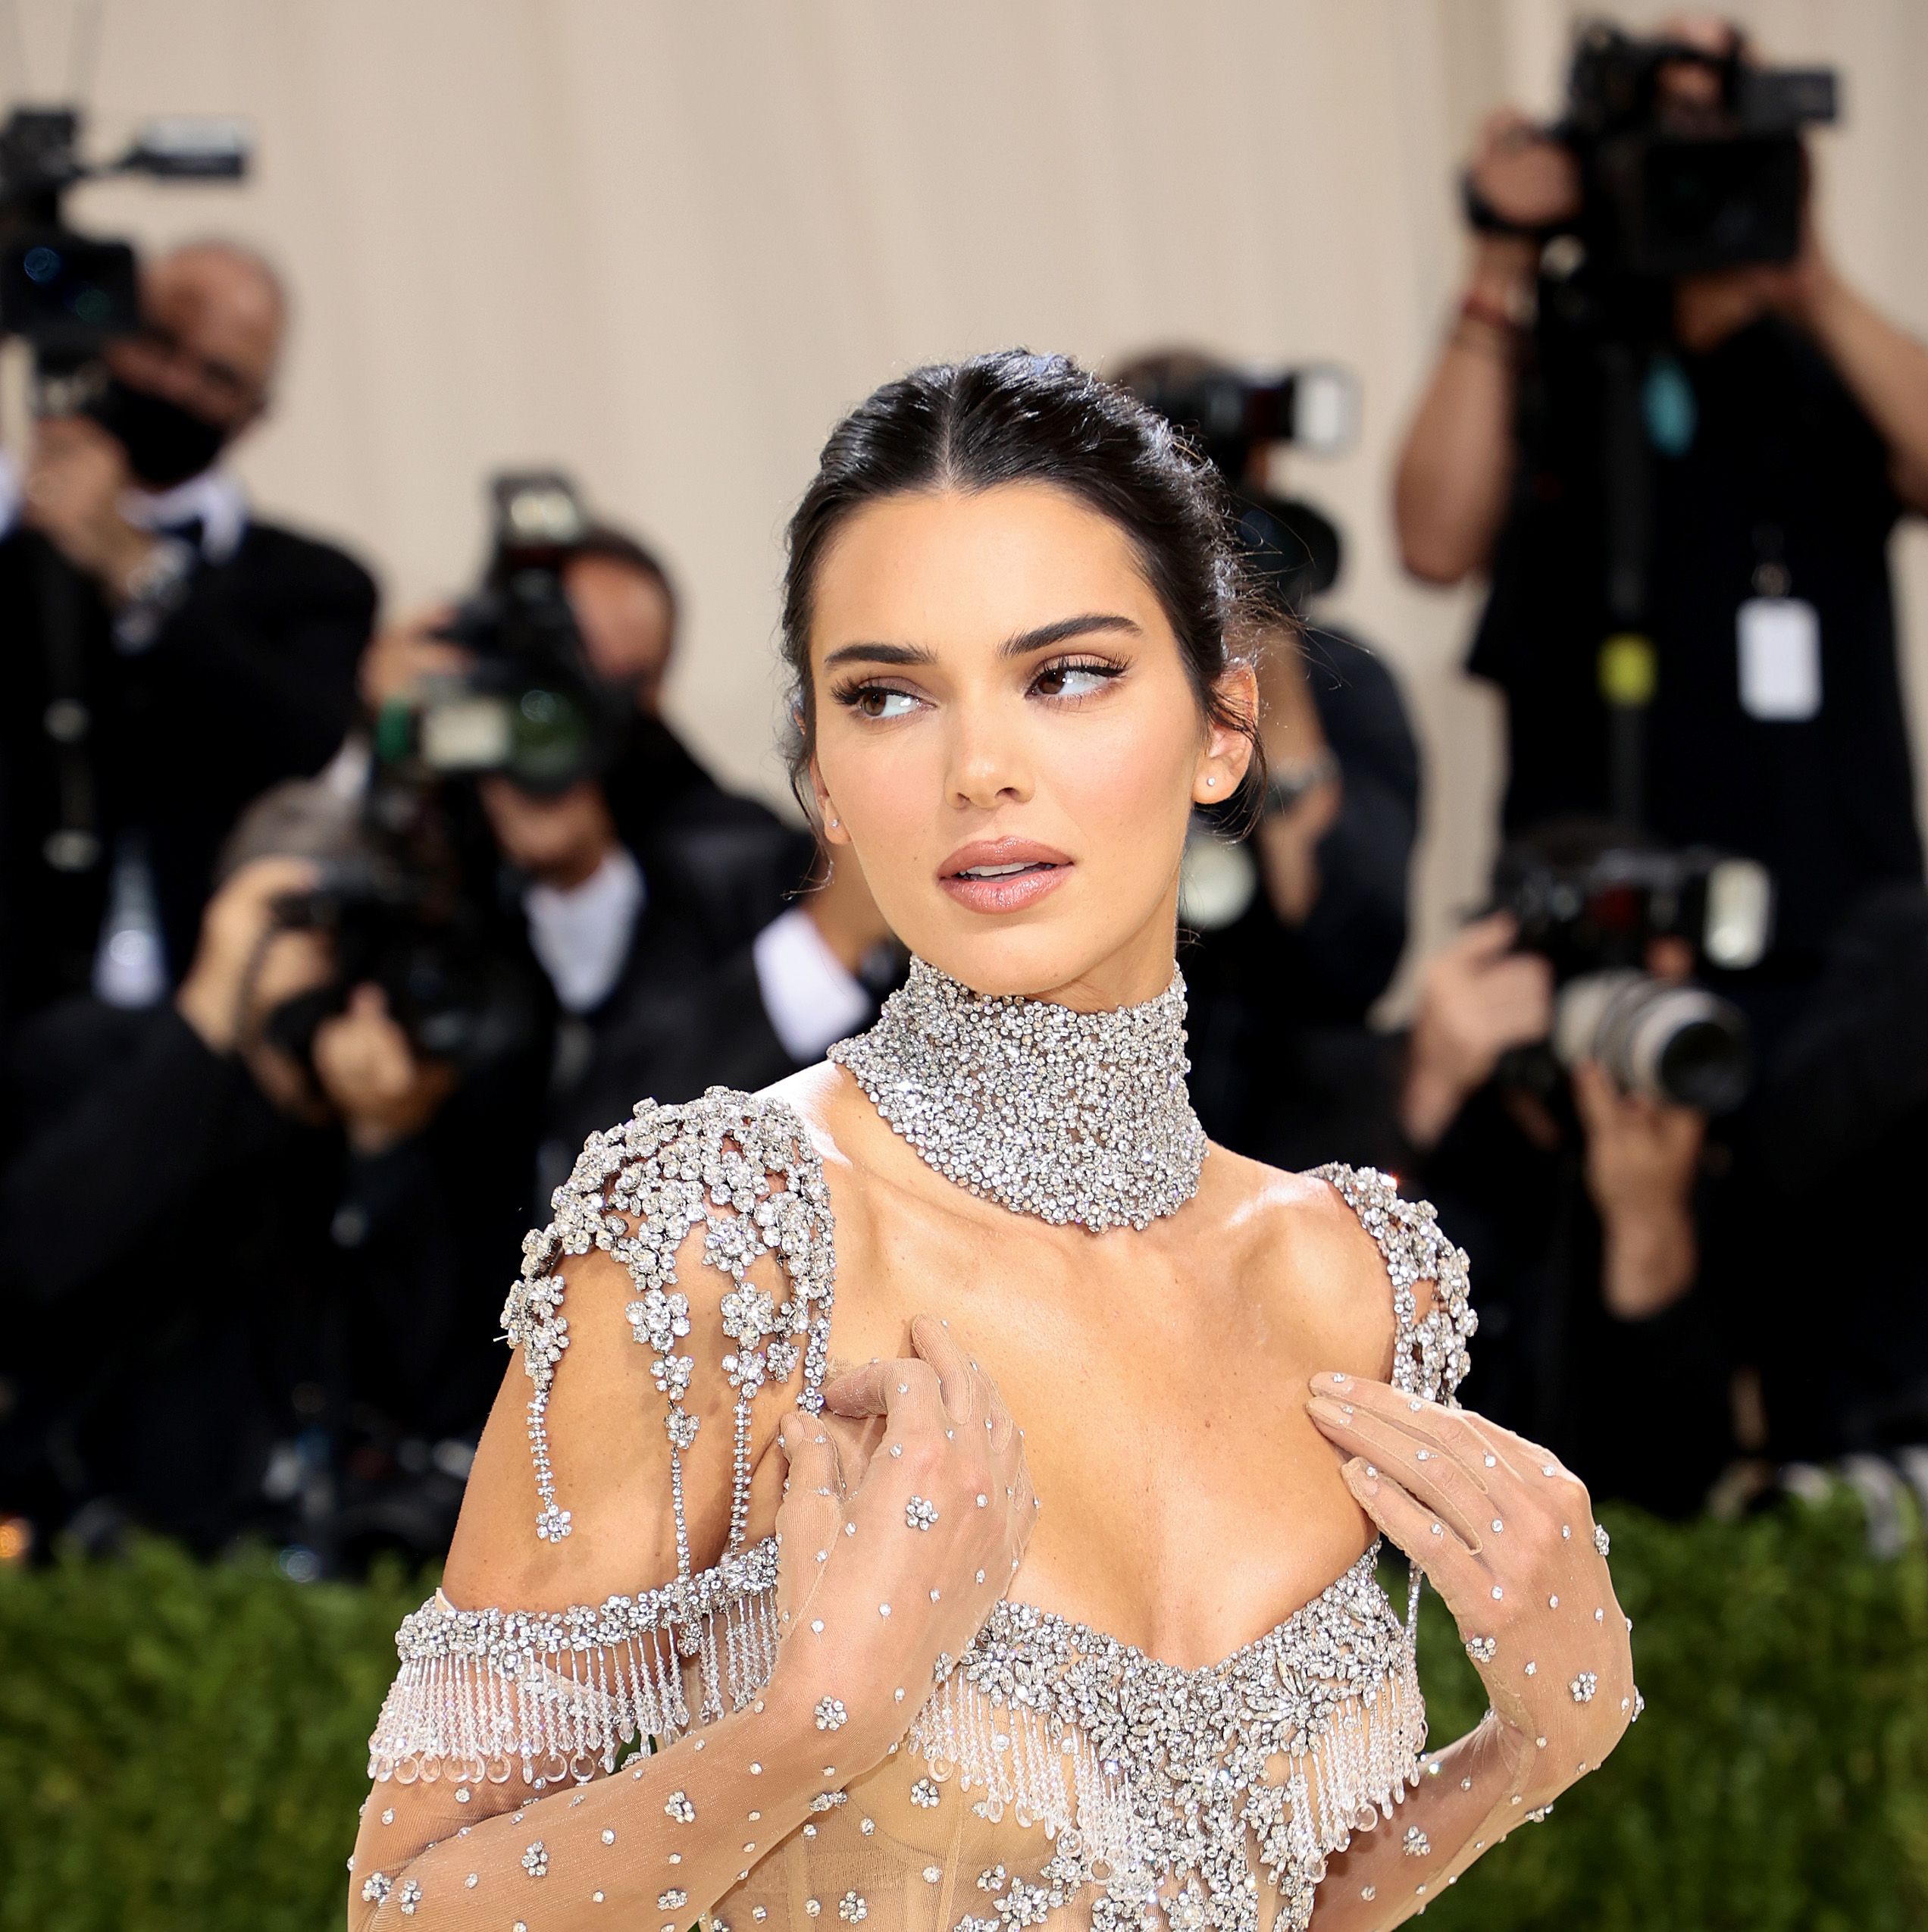 Kendall Jenner Says That, from a Young Age, It Was Her *Literal Job* to Let Others Control Her Image